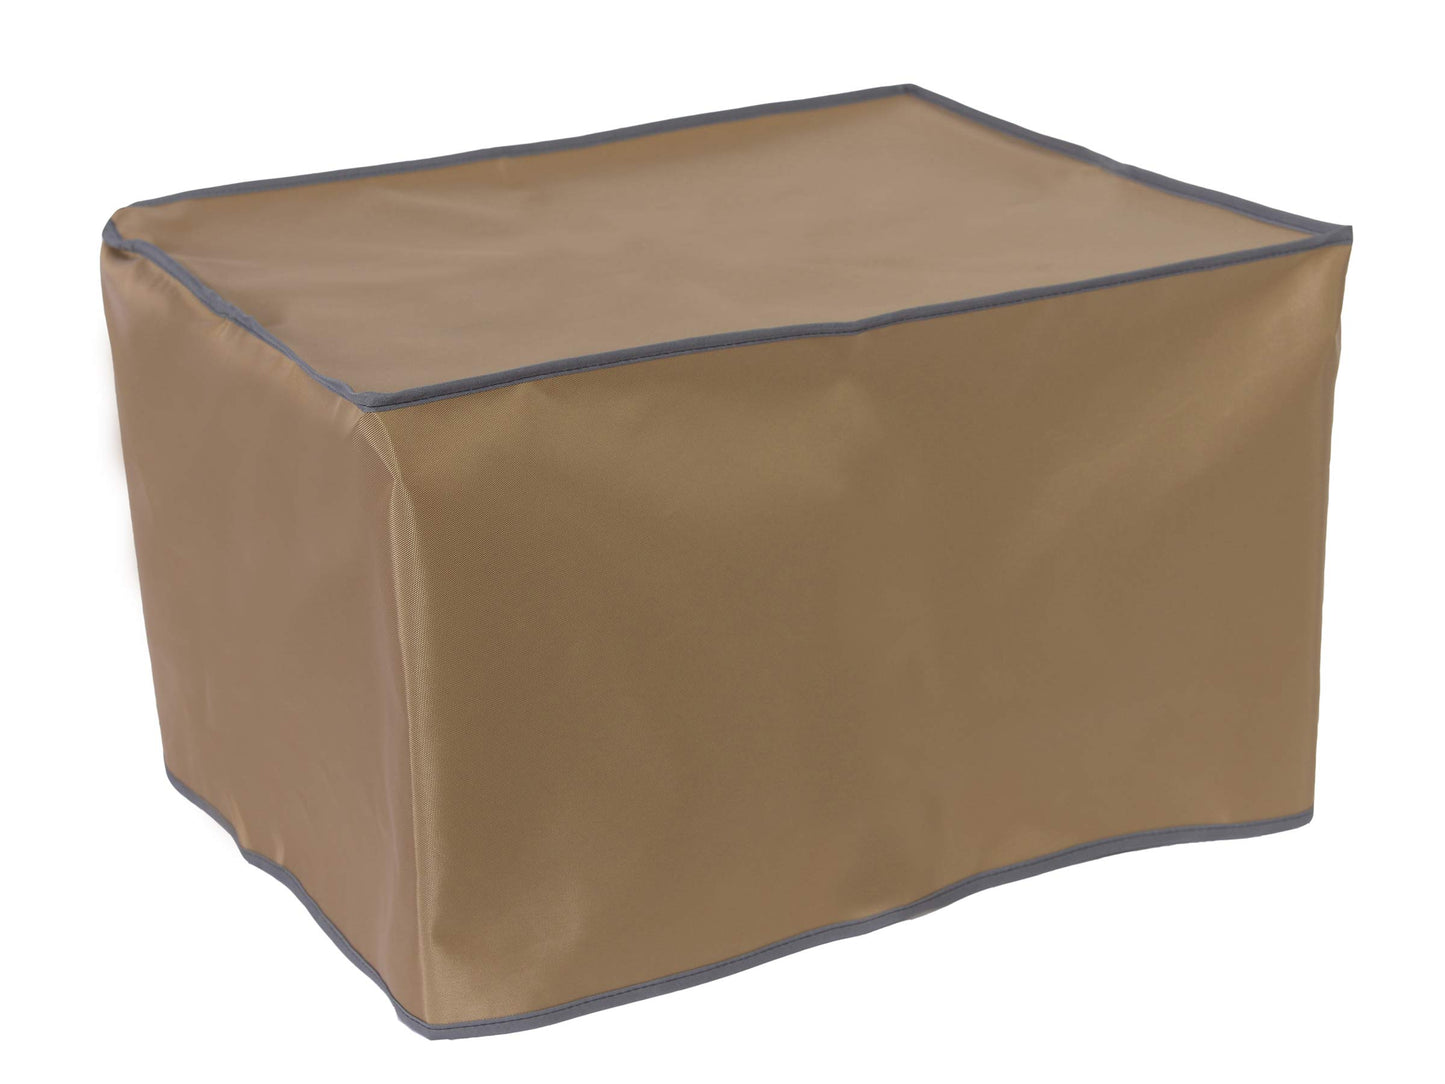 The Perfect Dust Cover, Tan Nylon Cover for Canon imagePROGRAF iPF6450 24'' Large Format Printer, Anti Static Waterproof Dimensions 48.3''W x 34.4''D x 39.4''H by The Perfect Dust Cover LLC